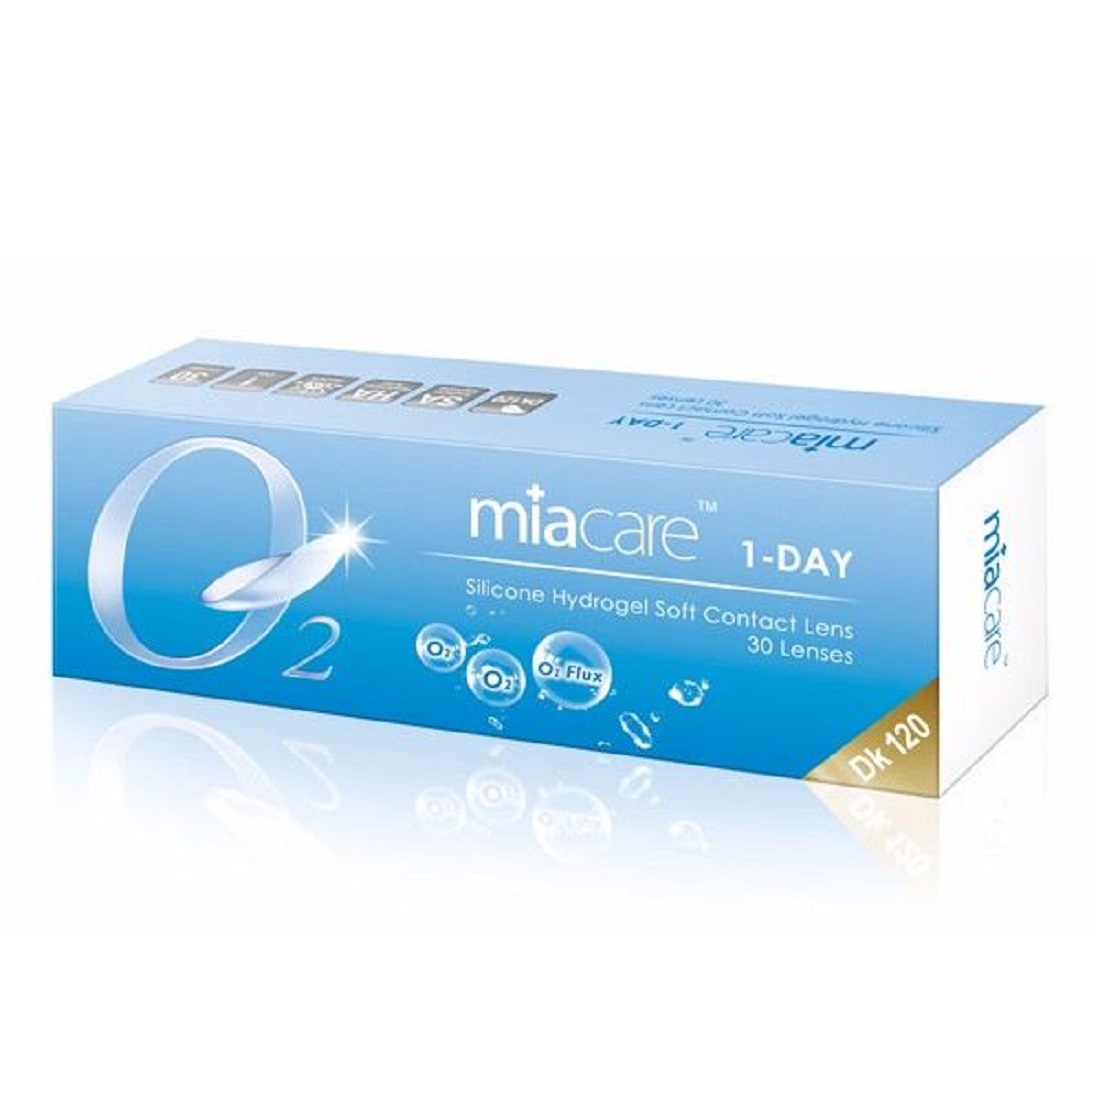 Miacare Silicon Hydrogel Daily contact lens with uv